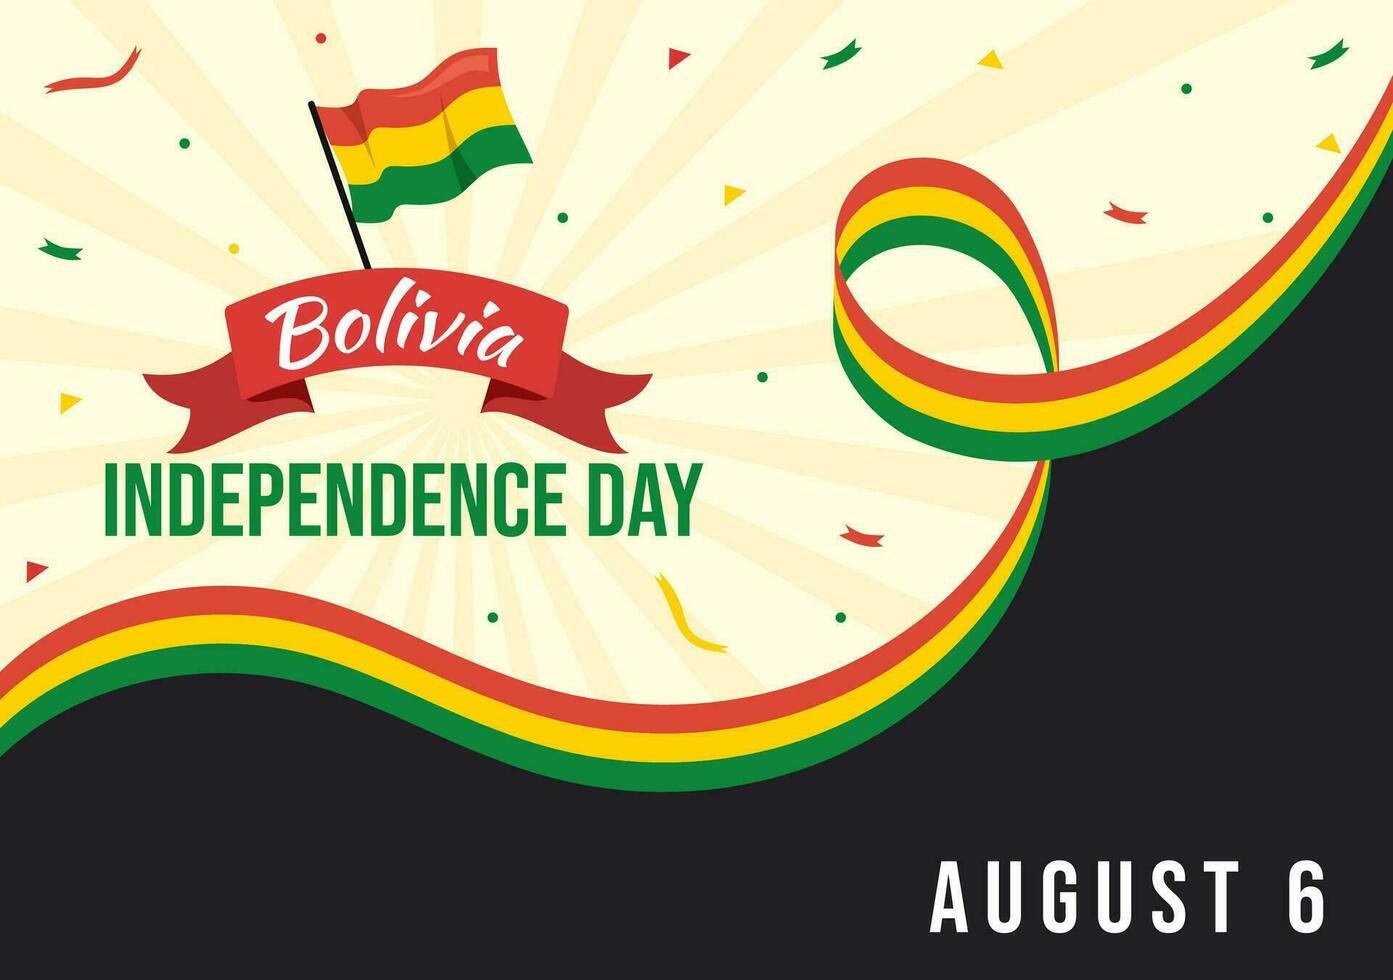 Bolivia Independence Day Vector Illustration on 6 August with festival National Holiday in Flat Cartoon Hand Drawn Landing Page Background Templates